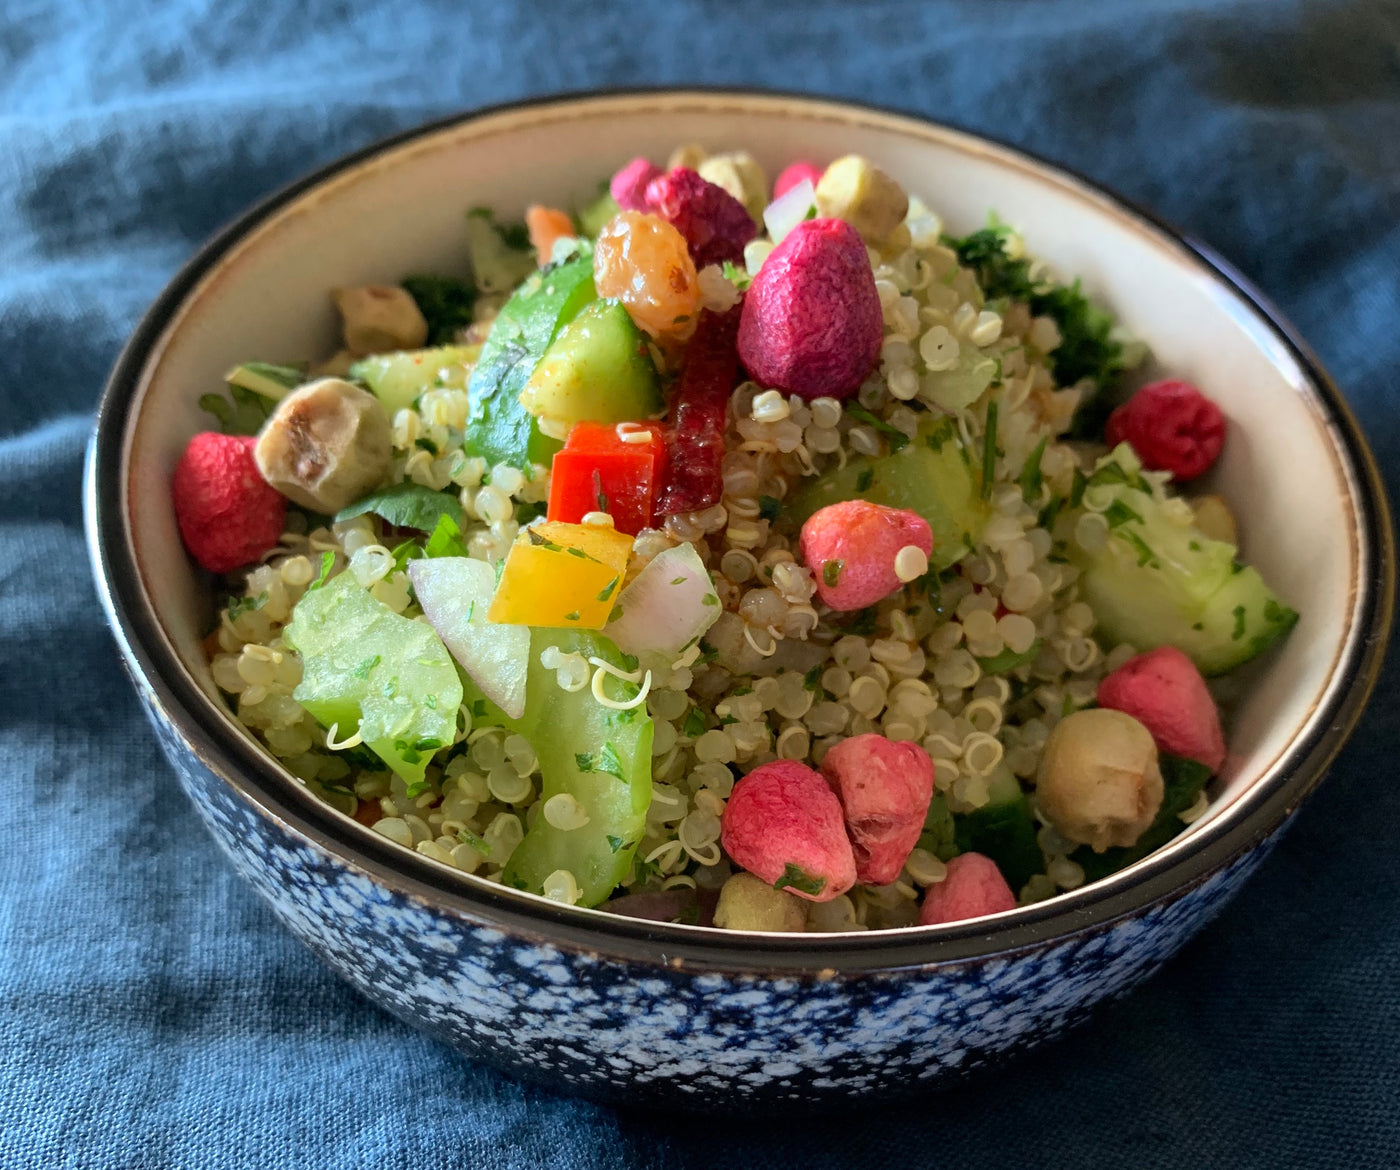 Moroccan Salad with Australian Flavours